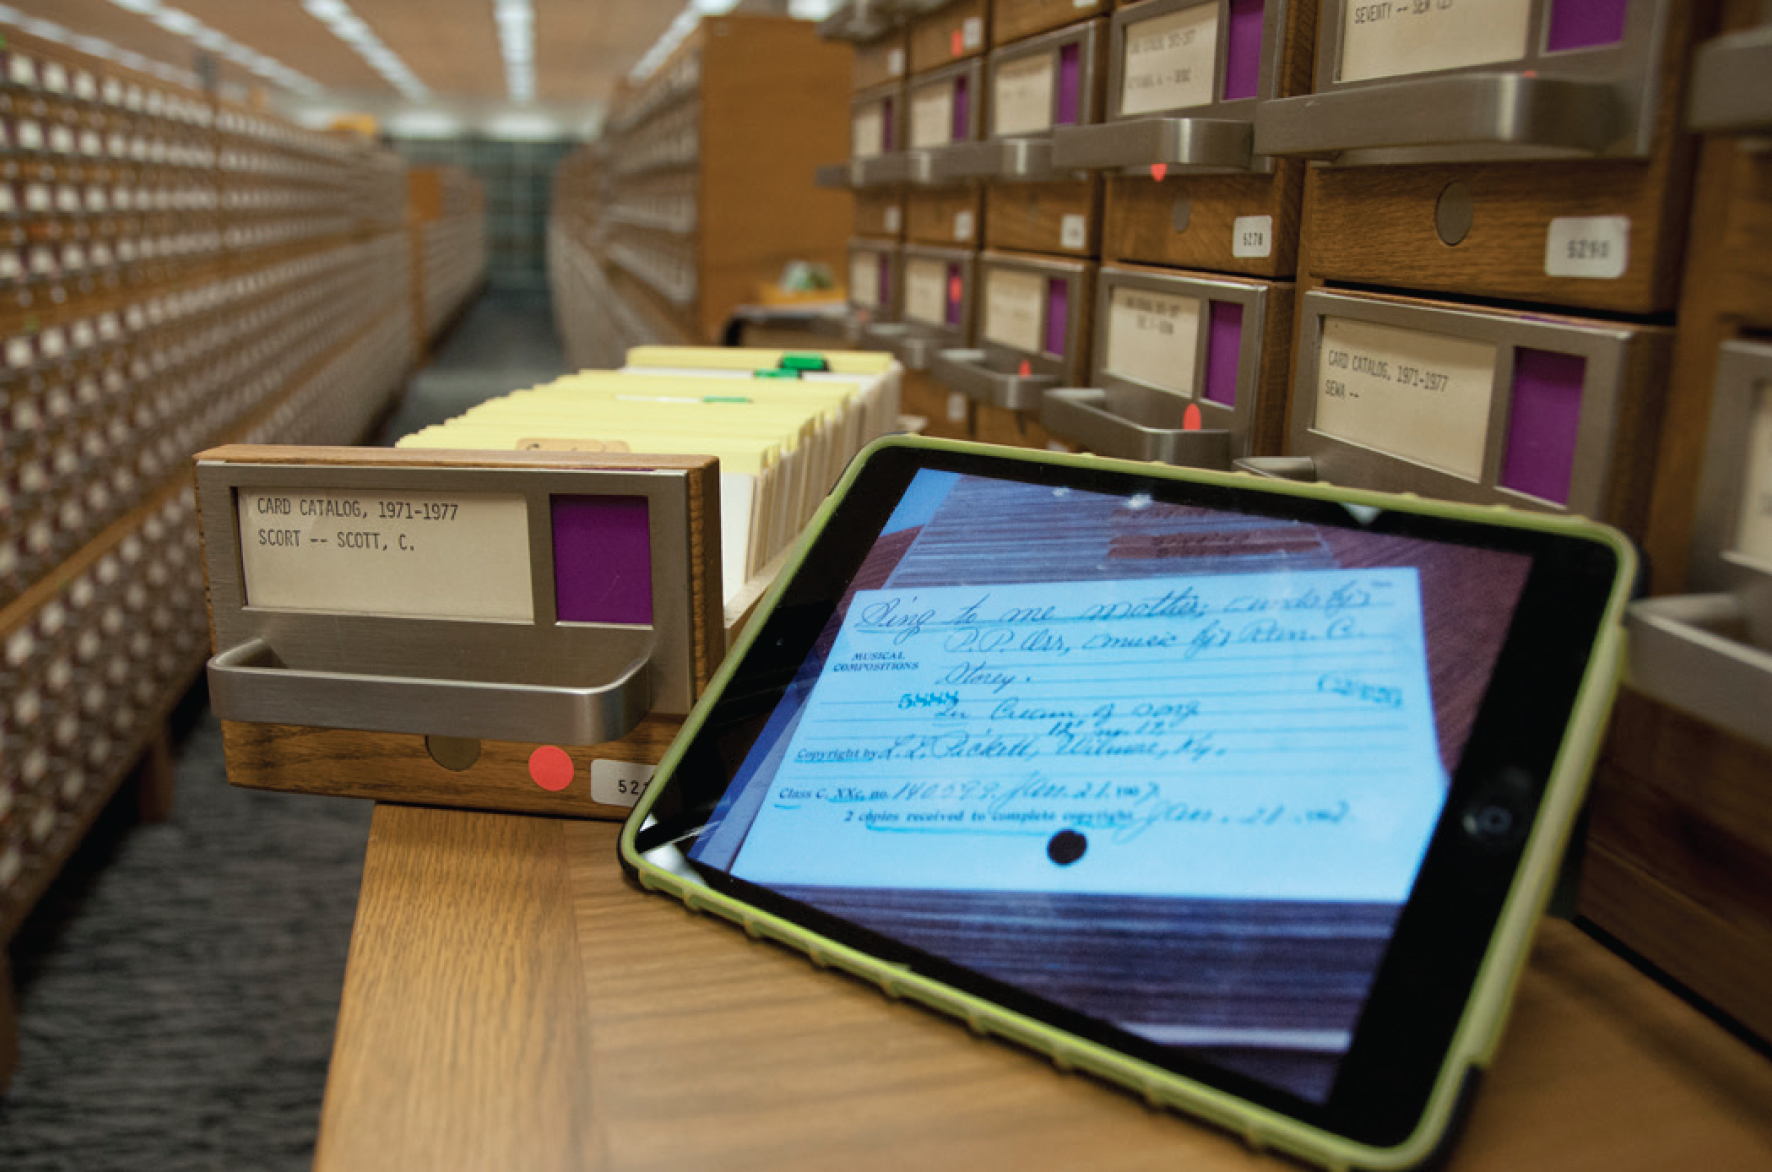 Tablet with scanned card; card catalog room and drawers